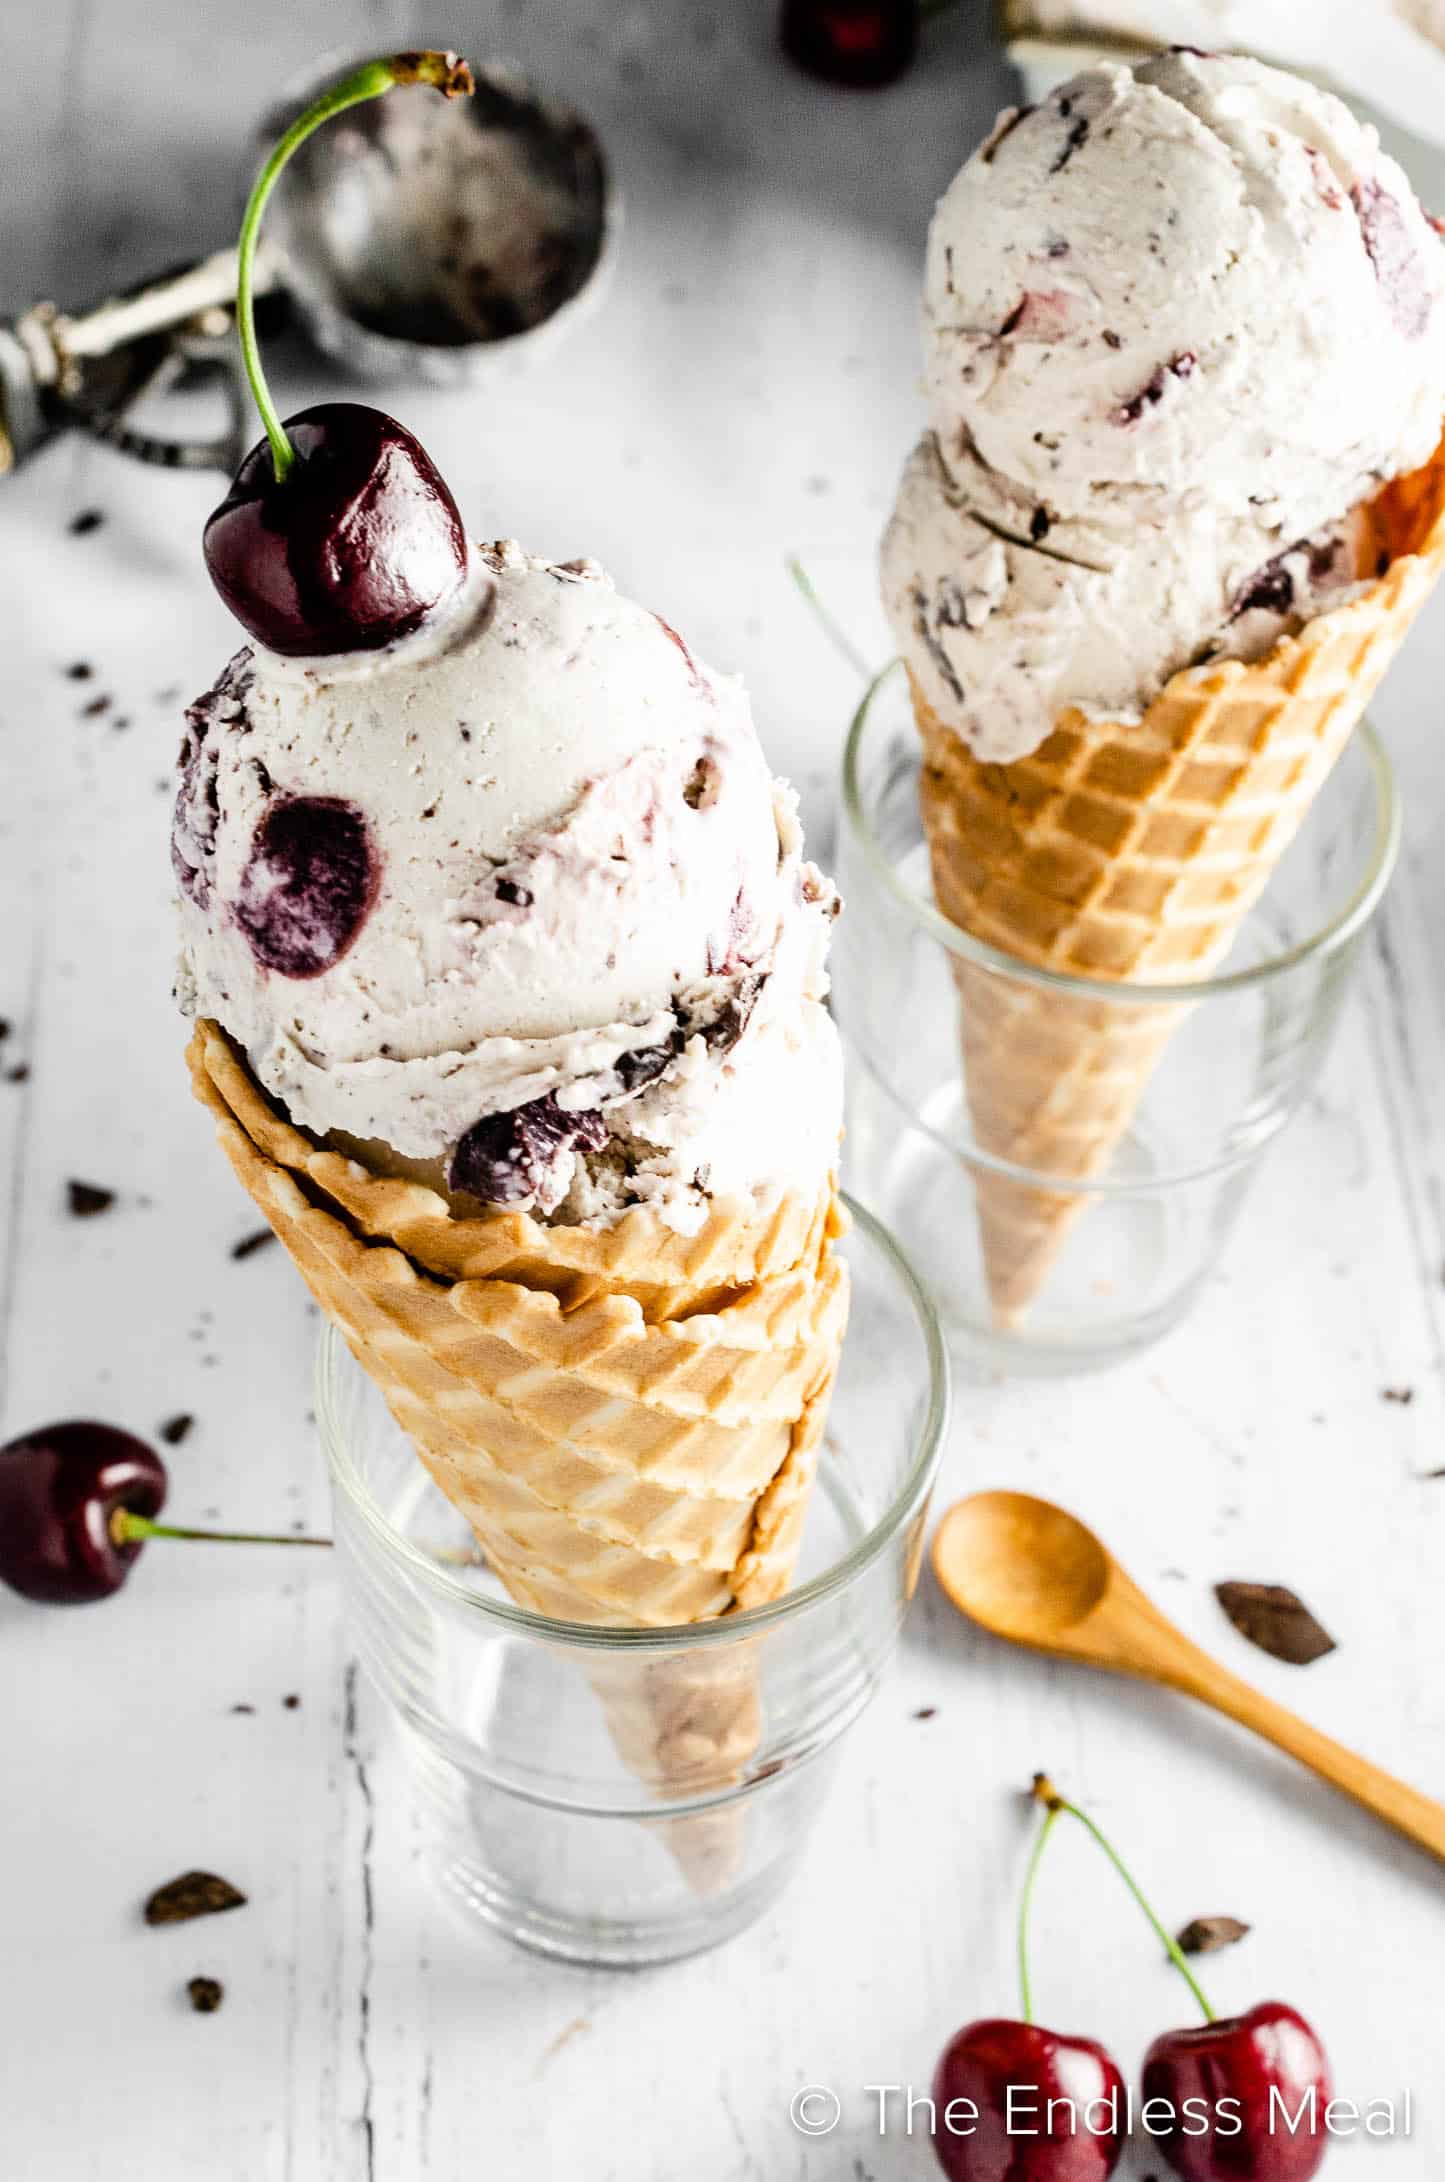 Two Vegan Cherry Garcia ice cream cones topped with a cherry